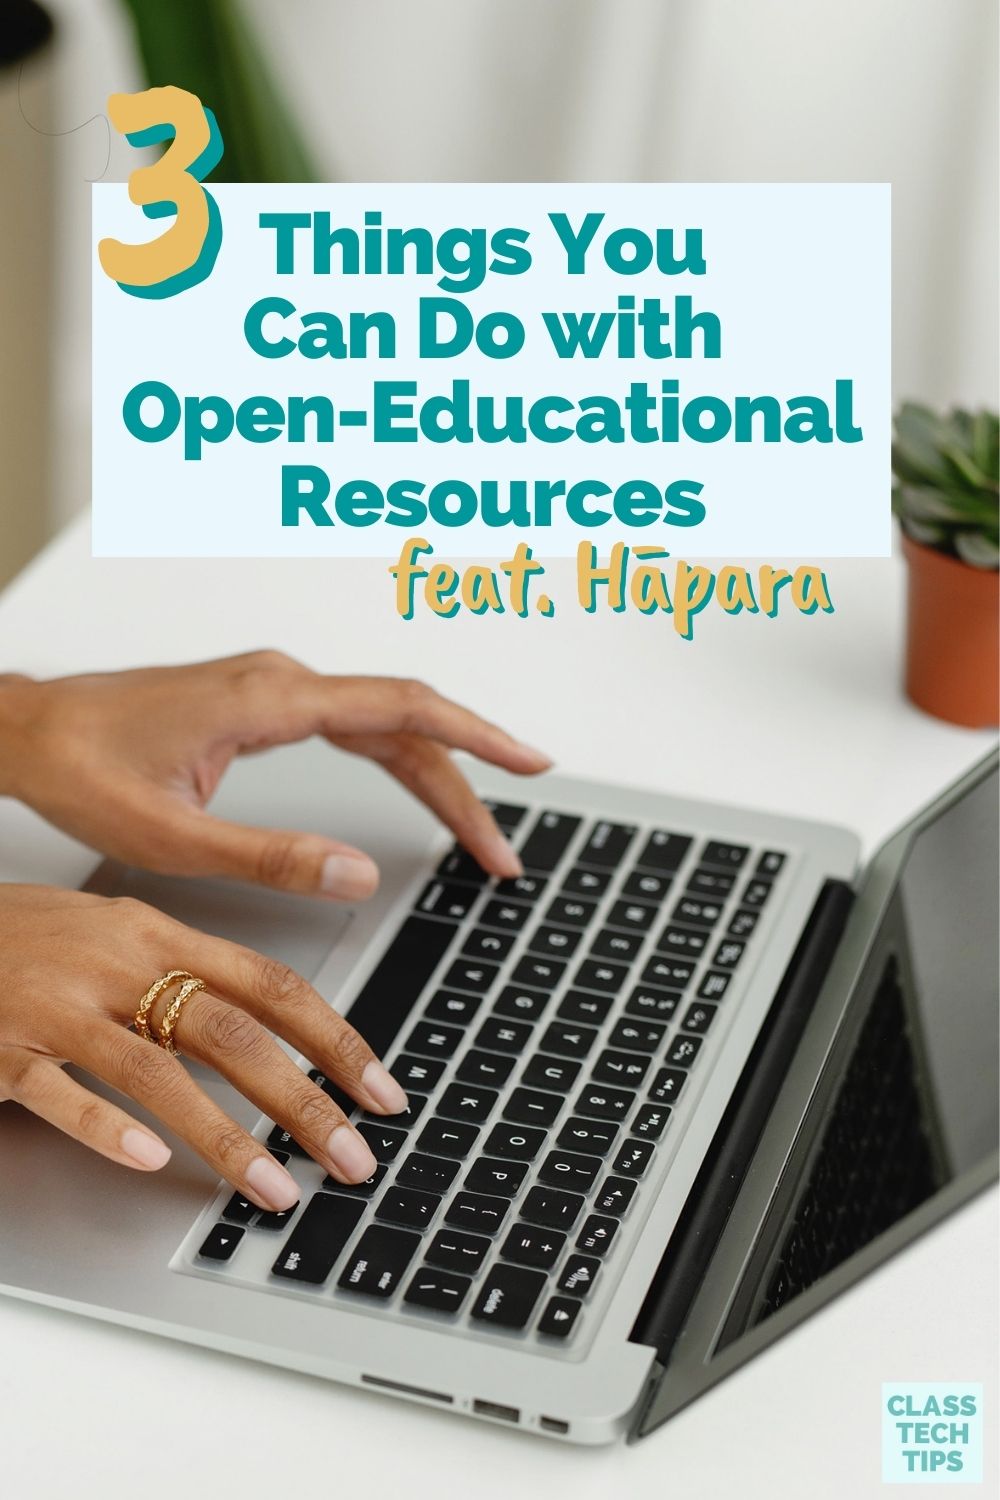 Teachers, schools, and districts can use open-educational resources as part of their core curriculum or to supplement their curriculum.